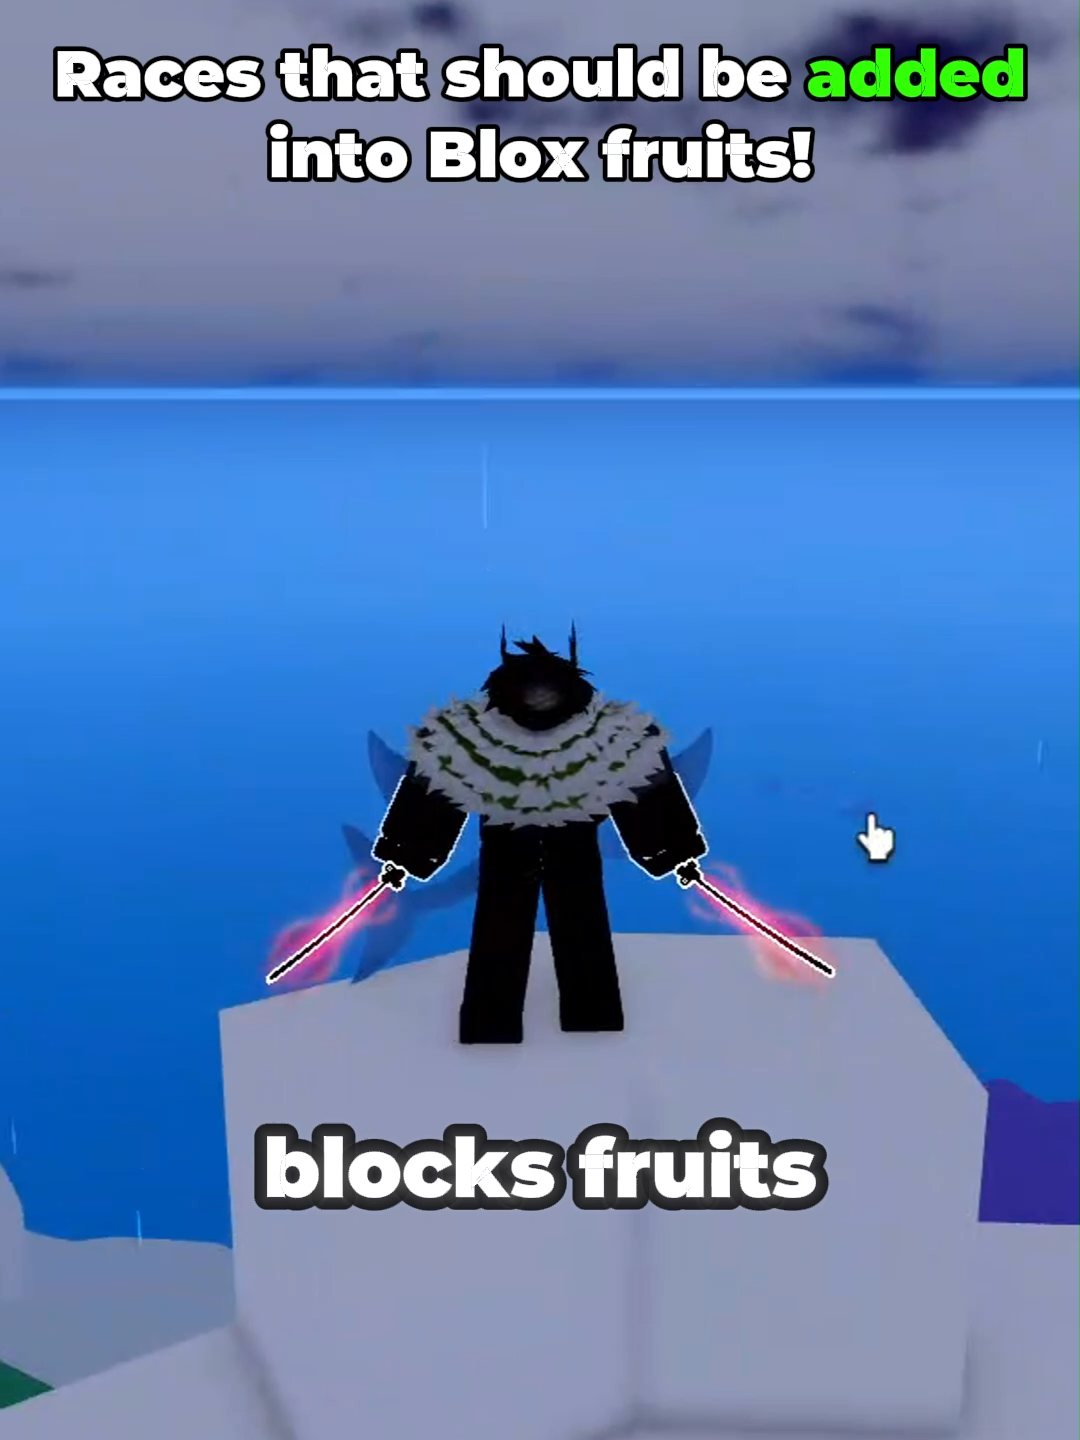 Races that should be added into Blox fruits?! #roblox #bloxfruits #dingdongdpirates #fyp #viral